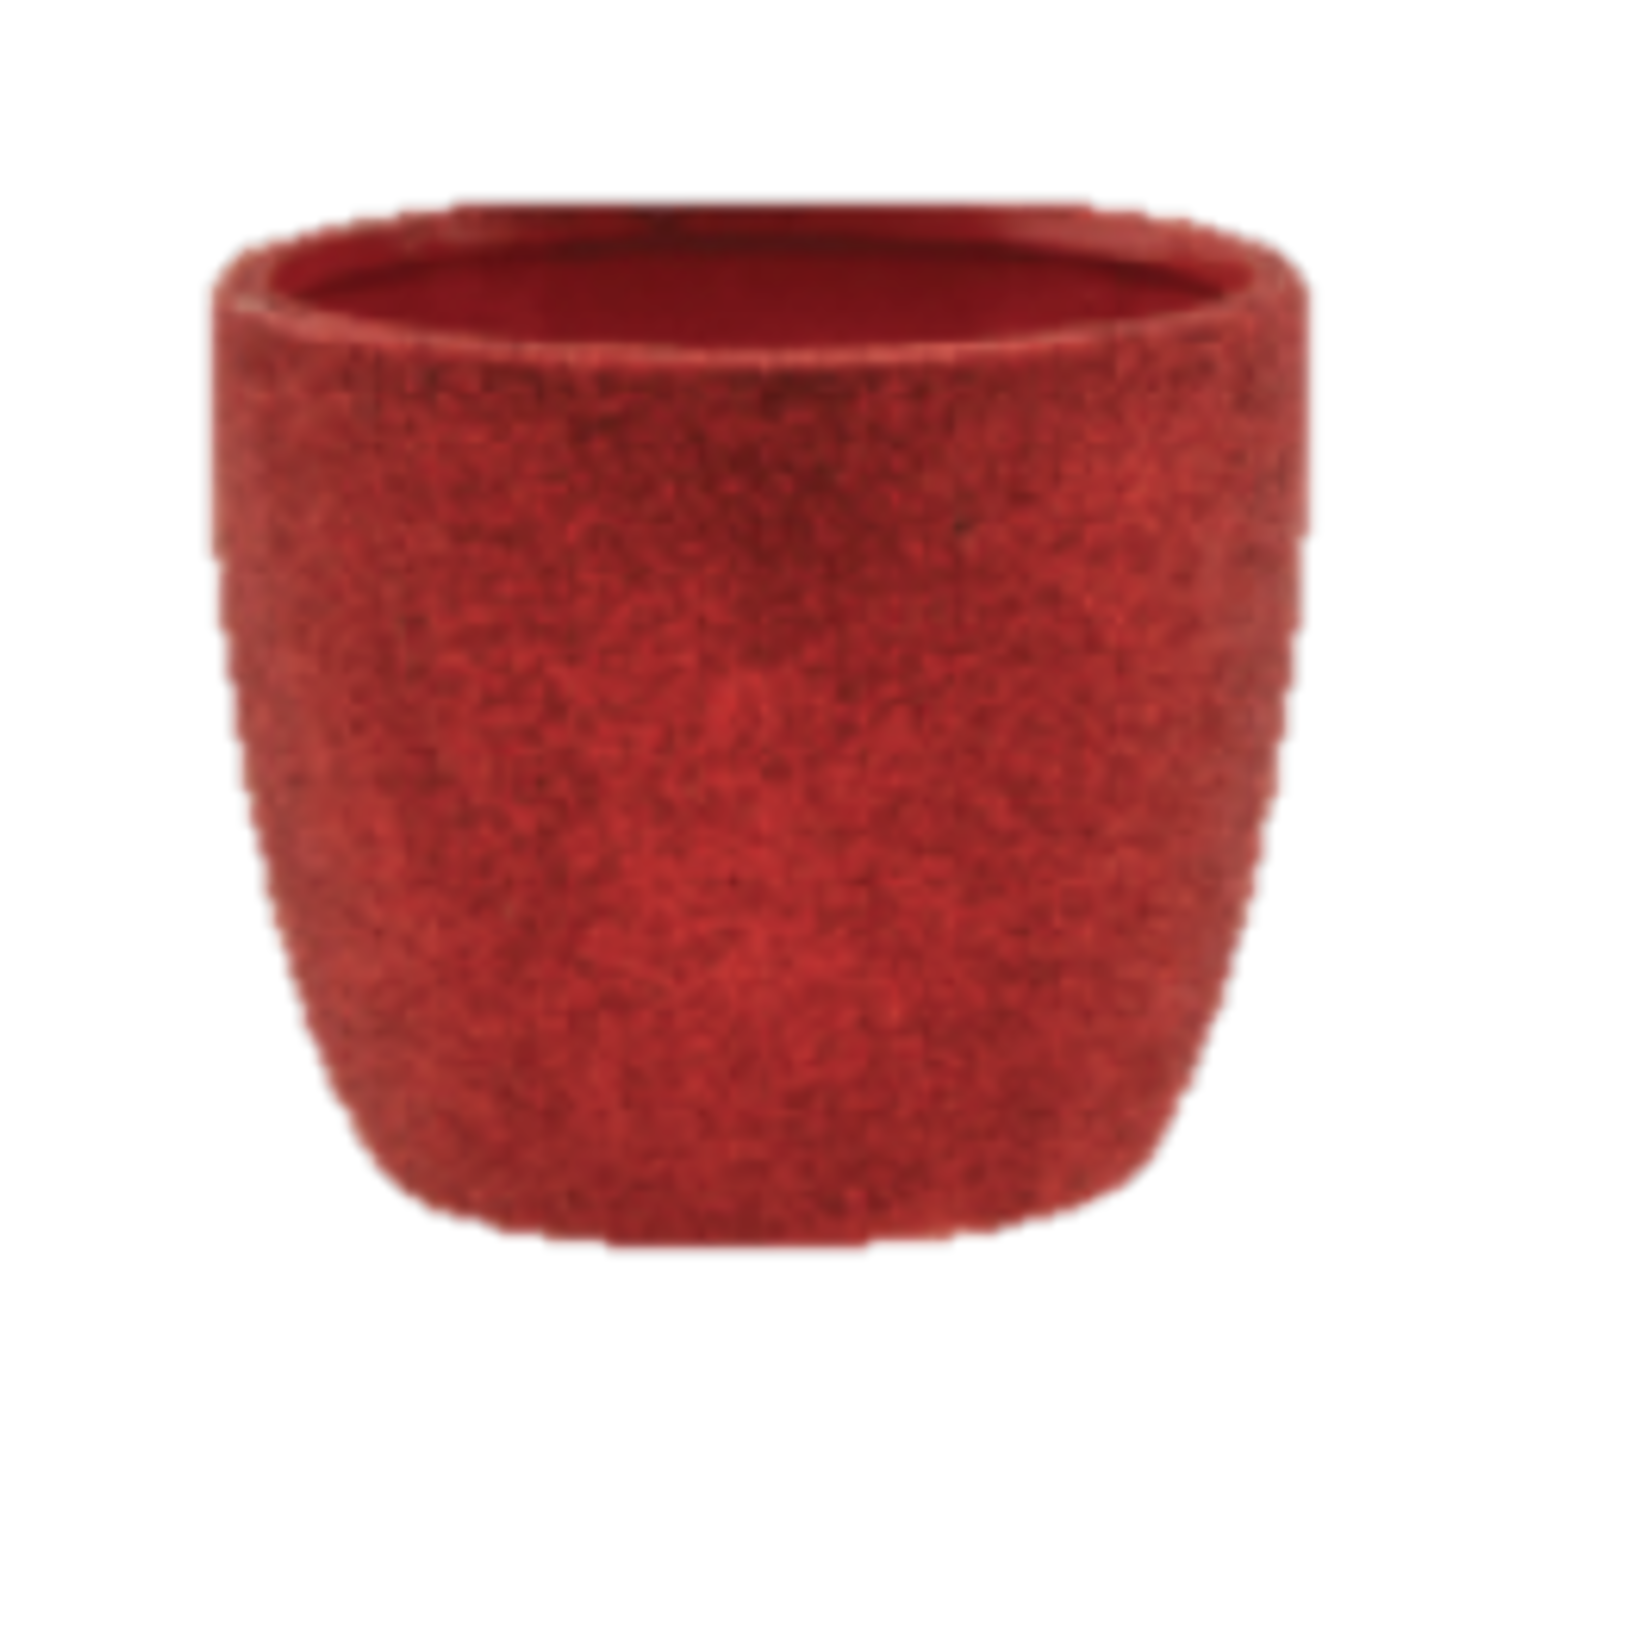 50% OFF WAS $7 NOW $3.49 4.75” X 4.75” RED GLITTER CERAMIC POT